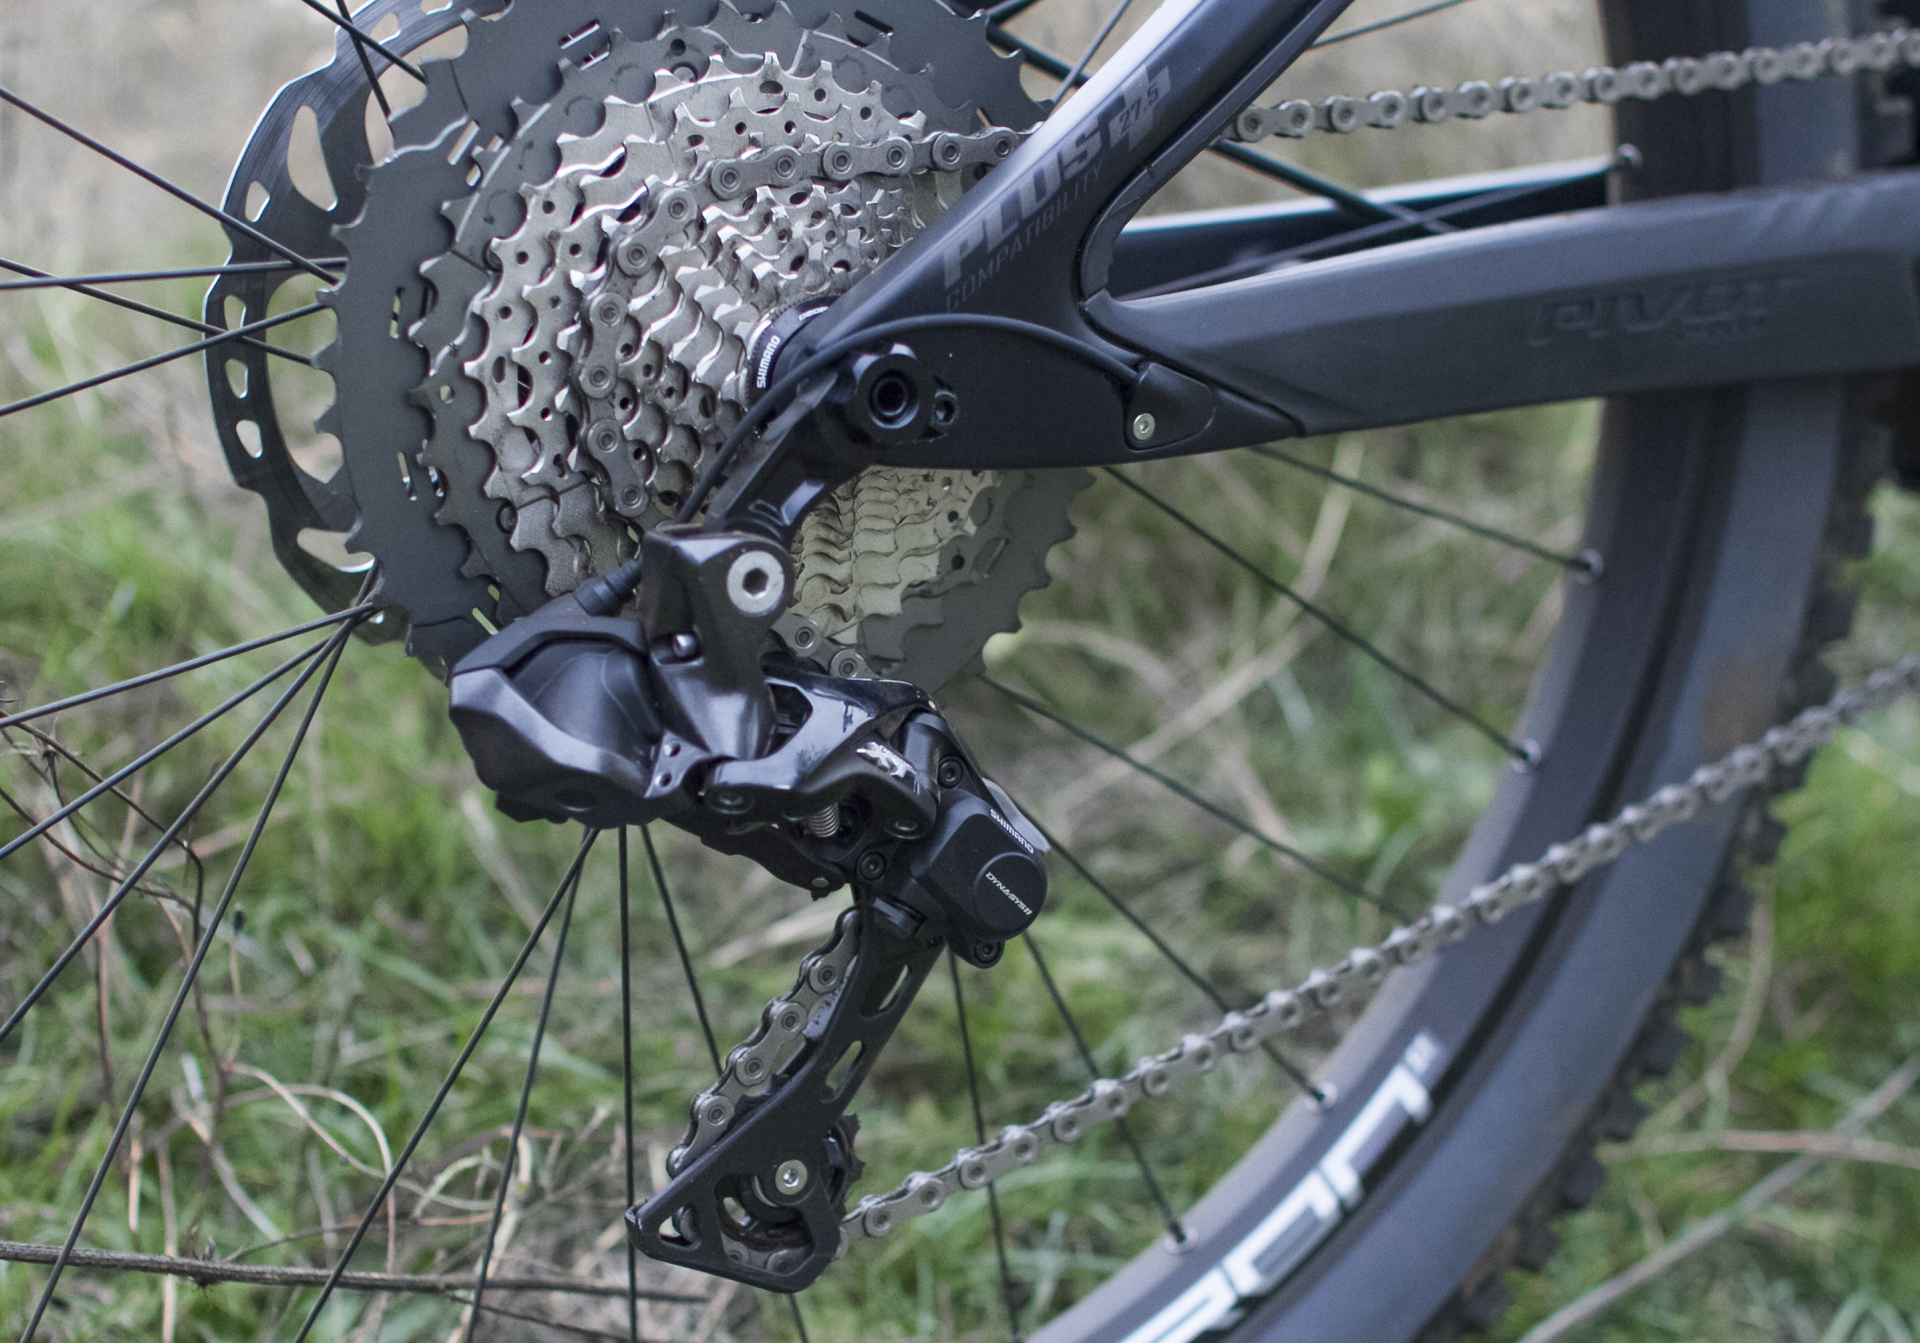 Shimano electric mountain bike components impressions